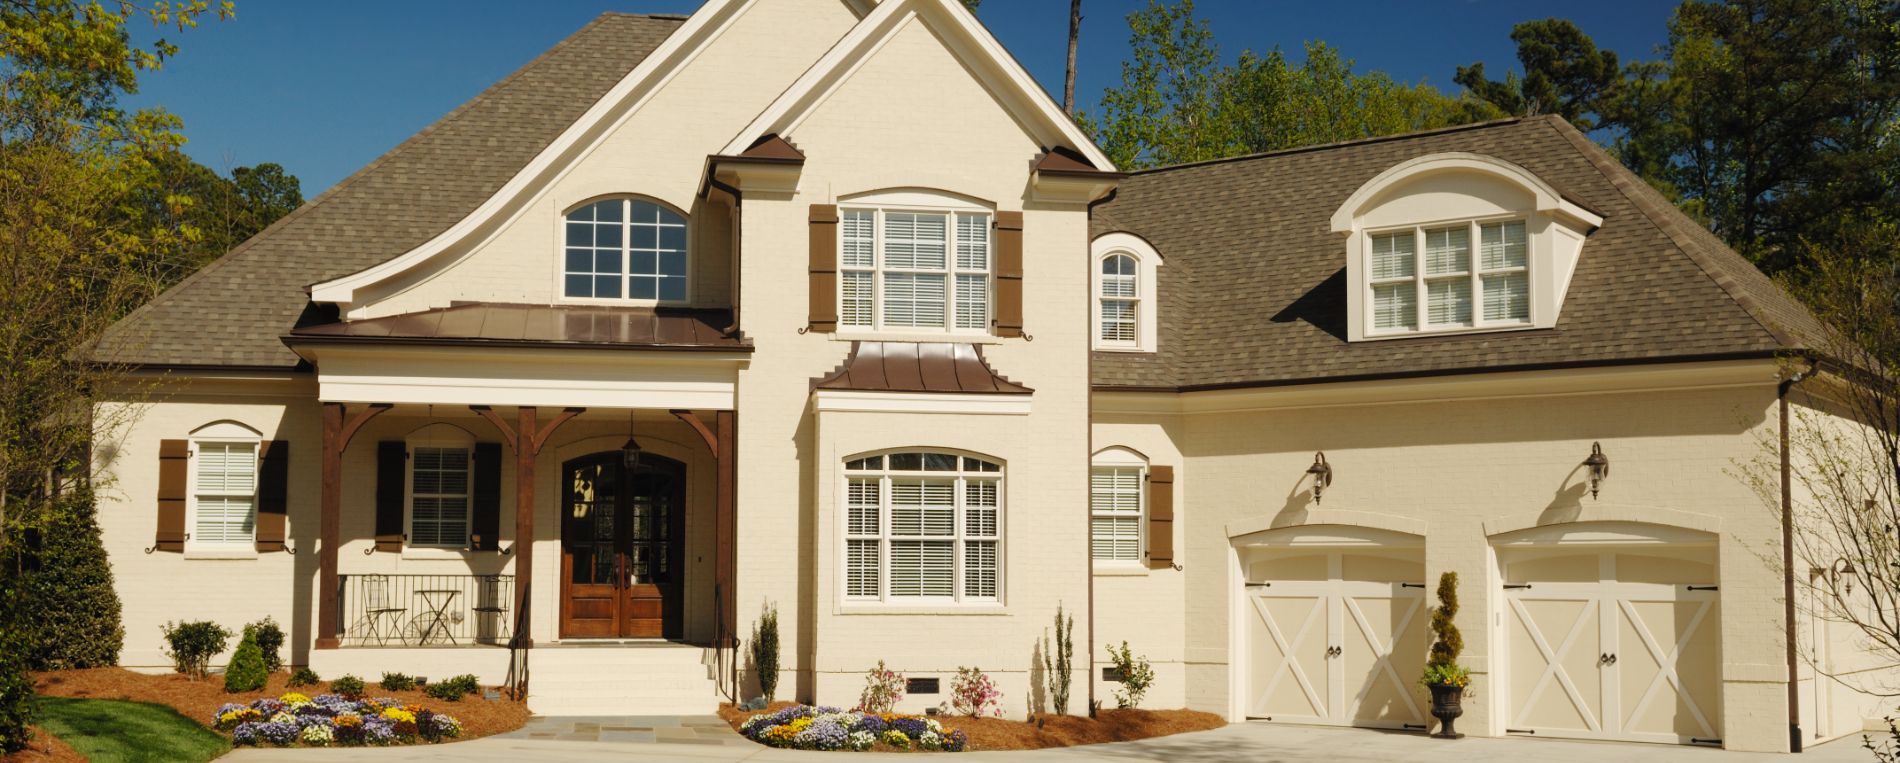 A view to home exterior with a double garage door